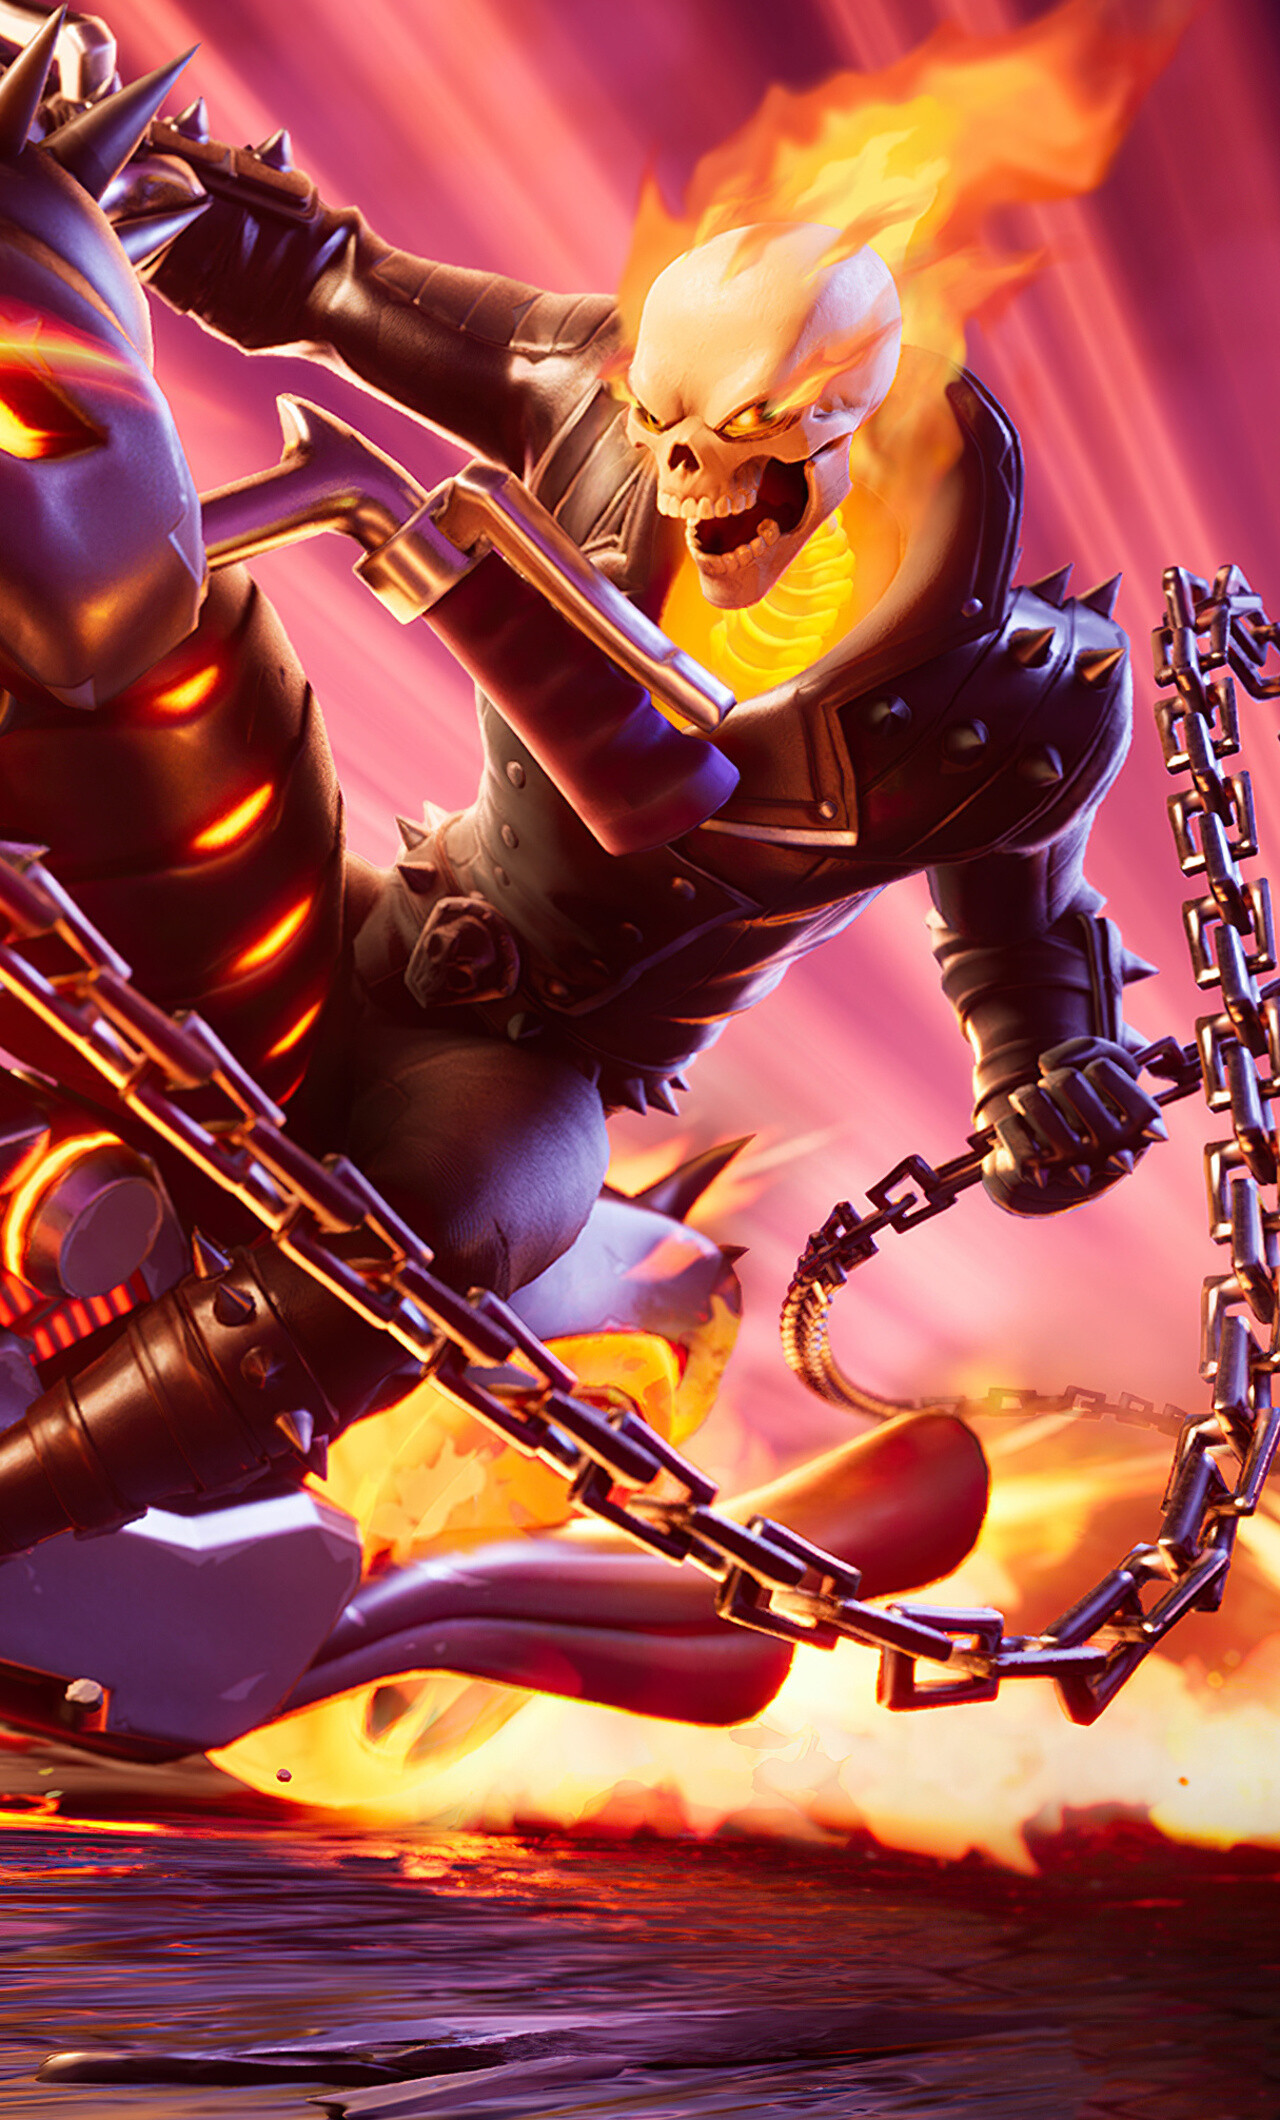 Fortnite: Ghost Rider, A Marvel Series Outfit that can be purchased in the Item Shop. 1280x2120 HD Wallpaper.